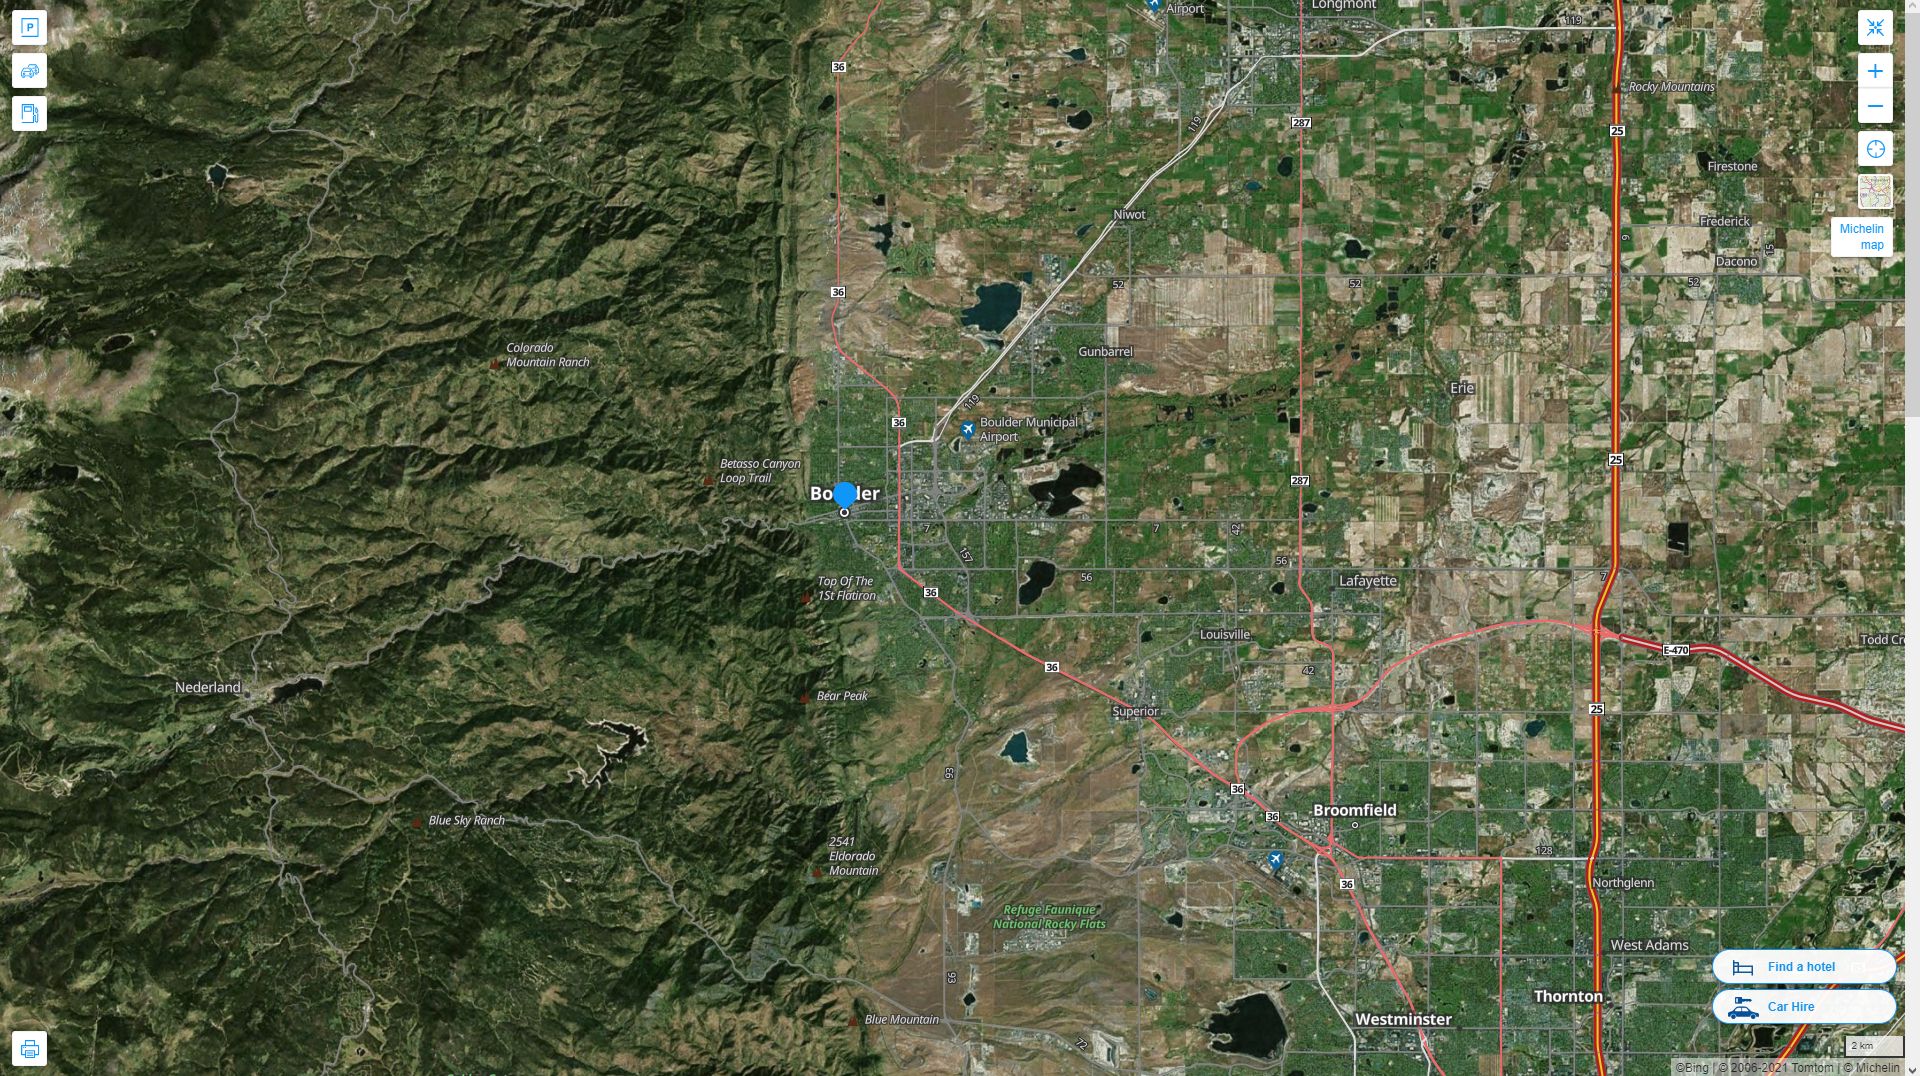 Boulder Colorado Highway and Road Map with Satellite View